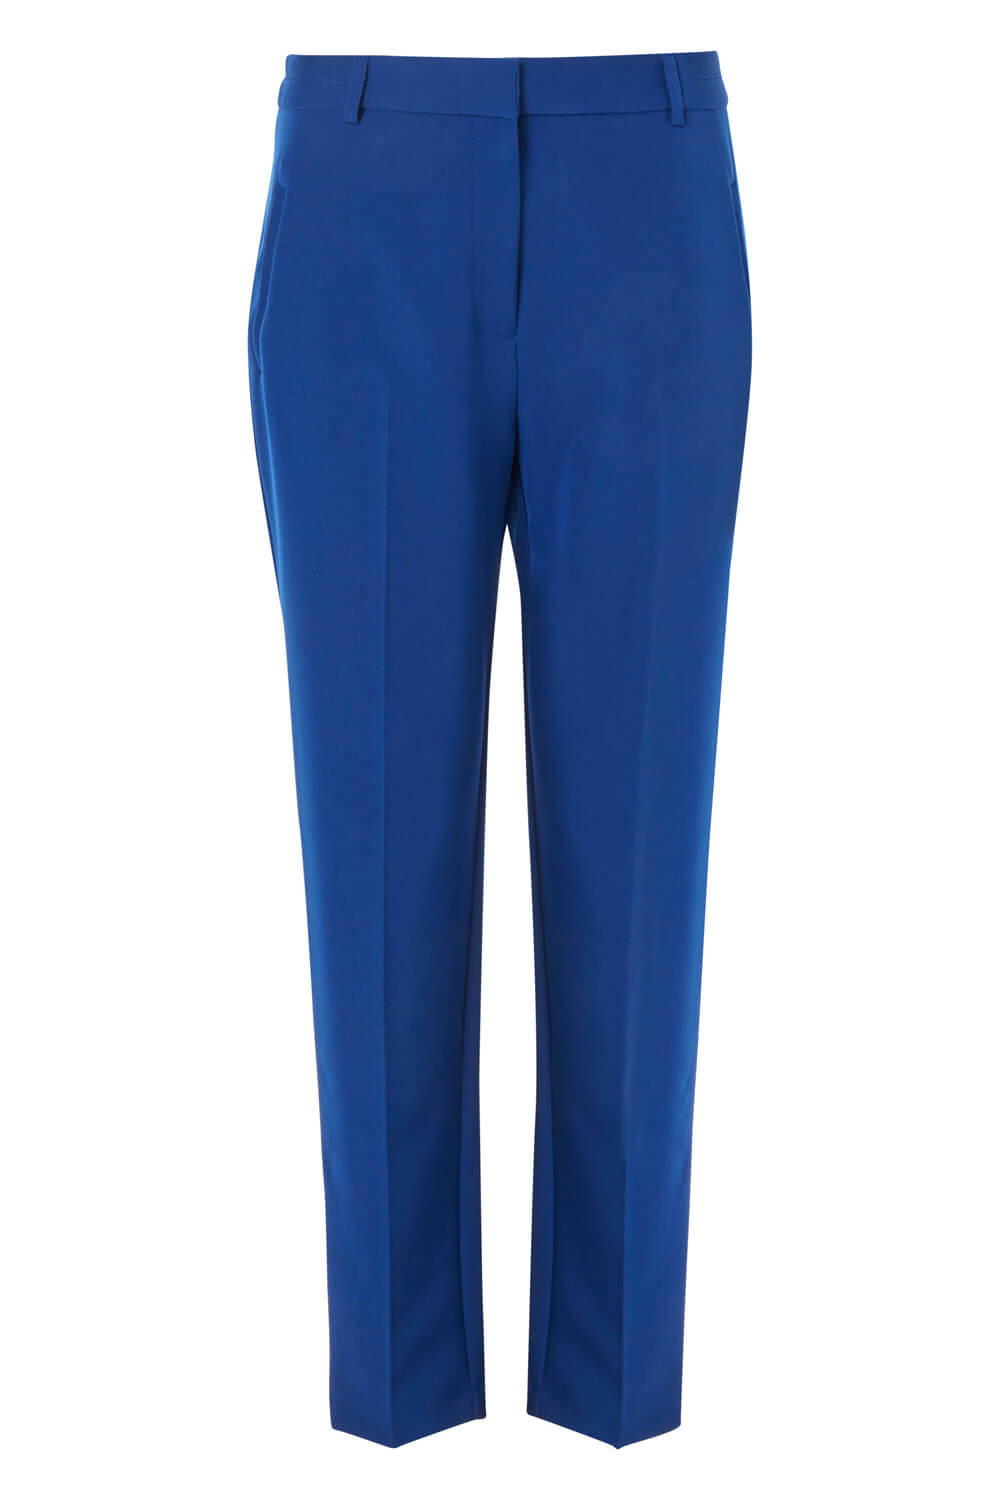 Midnight Blue Straight Leg Trousers, Image 4 of 4